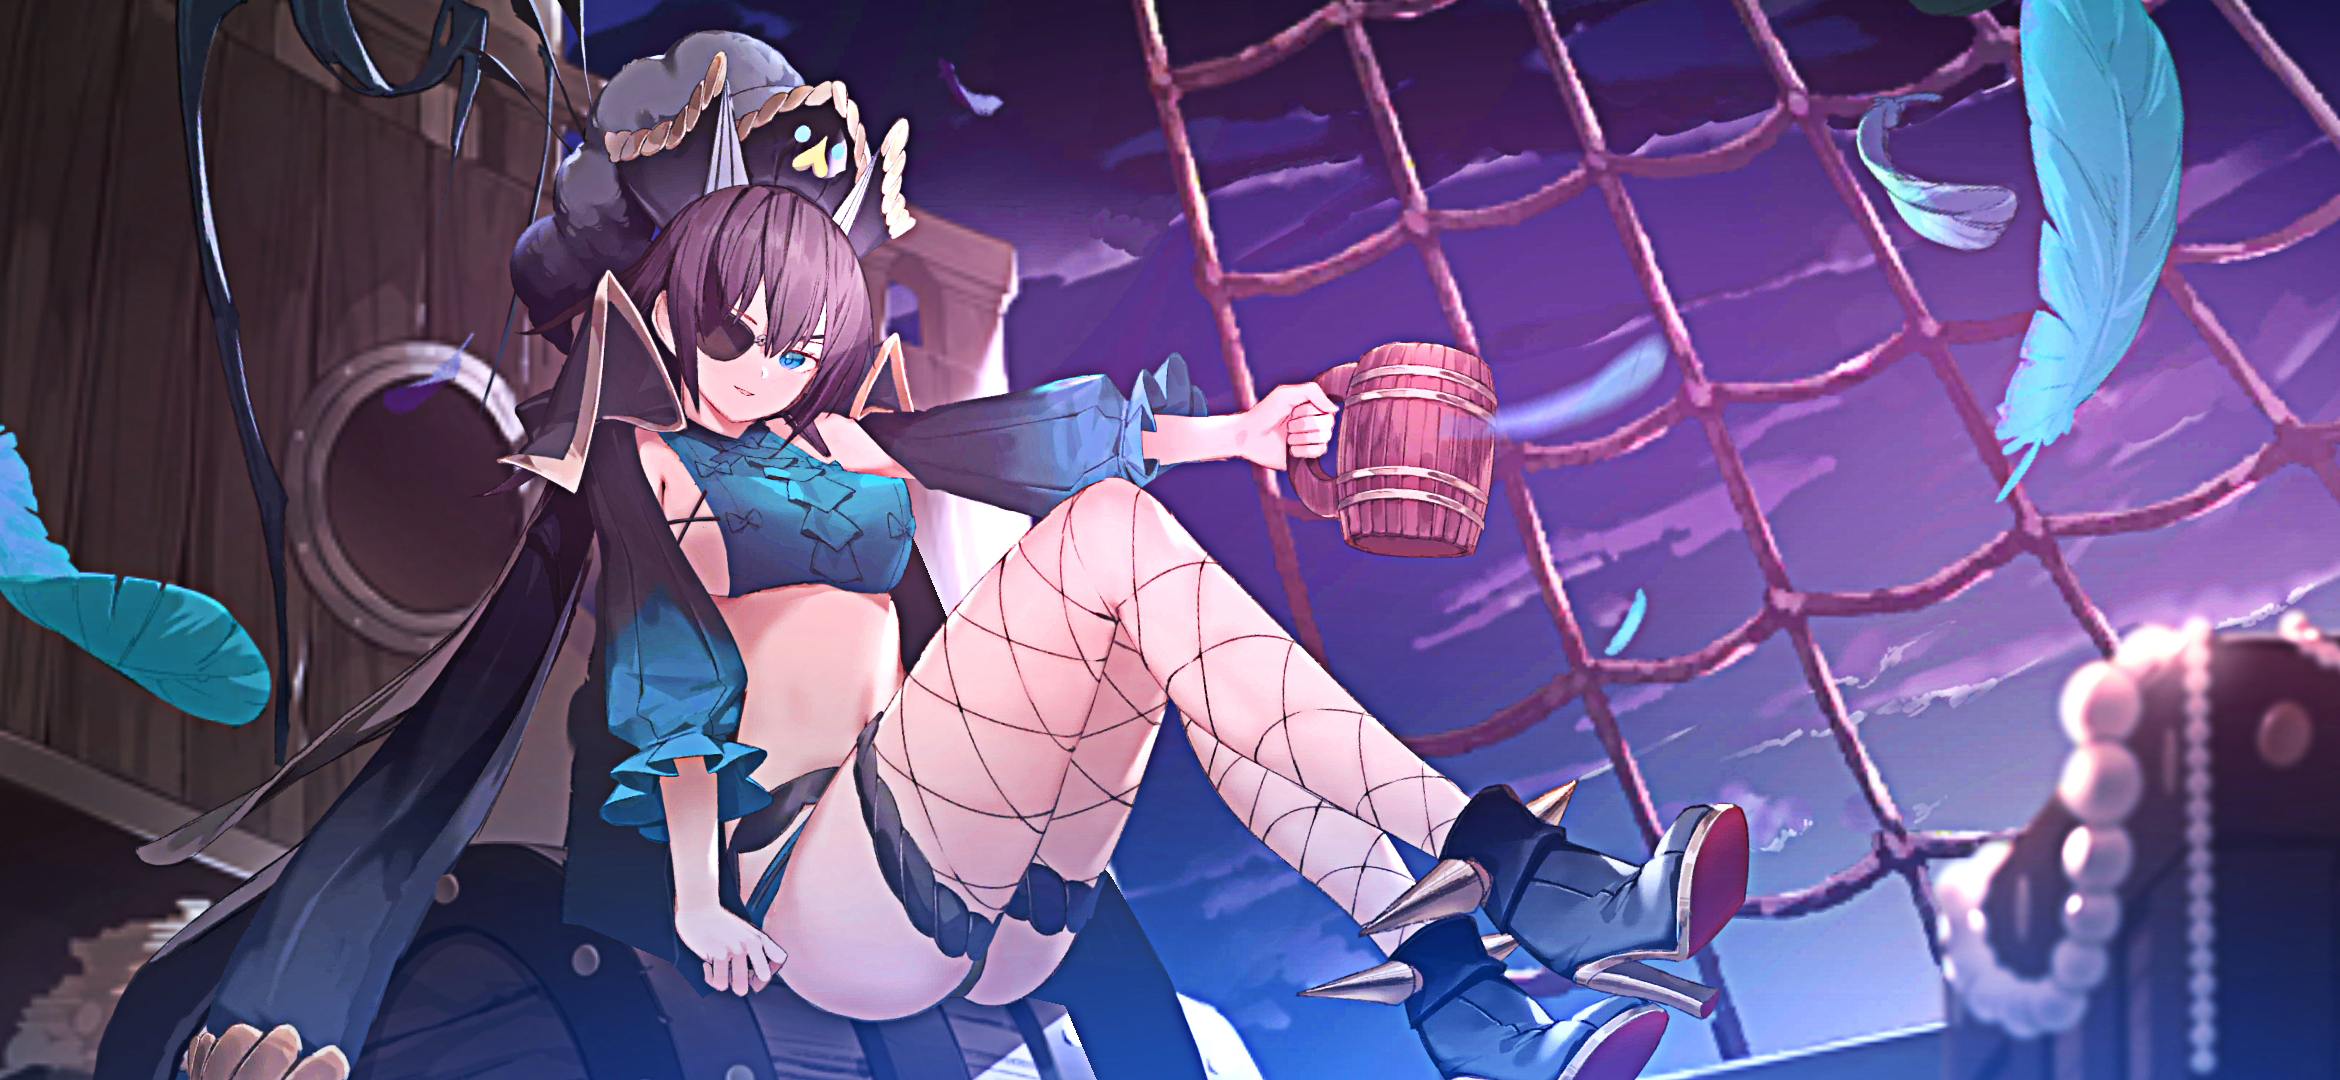 Game Characters Pirate Hat Anime Girls Anime Games Eyepatches Feathers Pirates 2340x1080